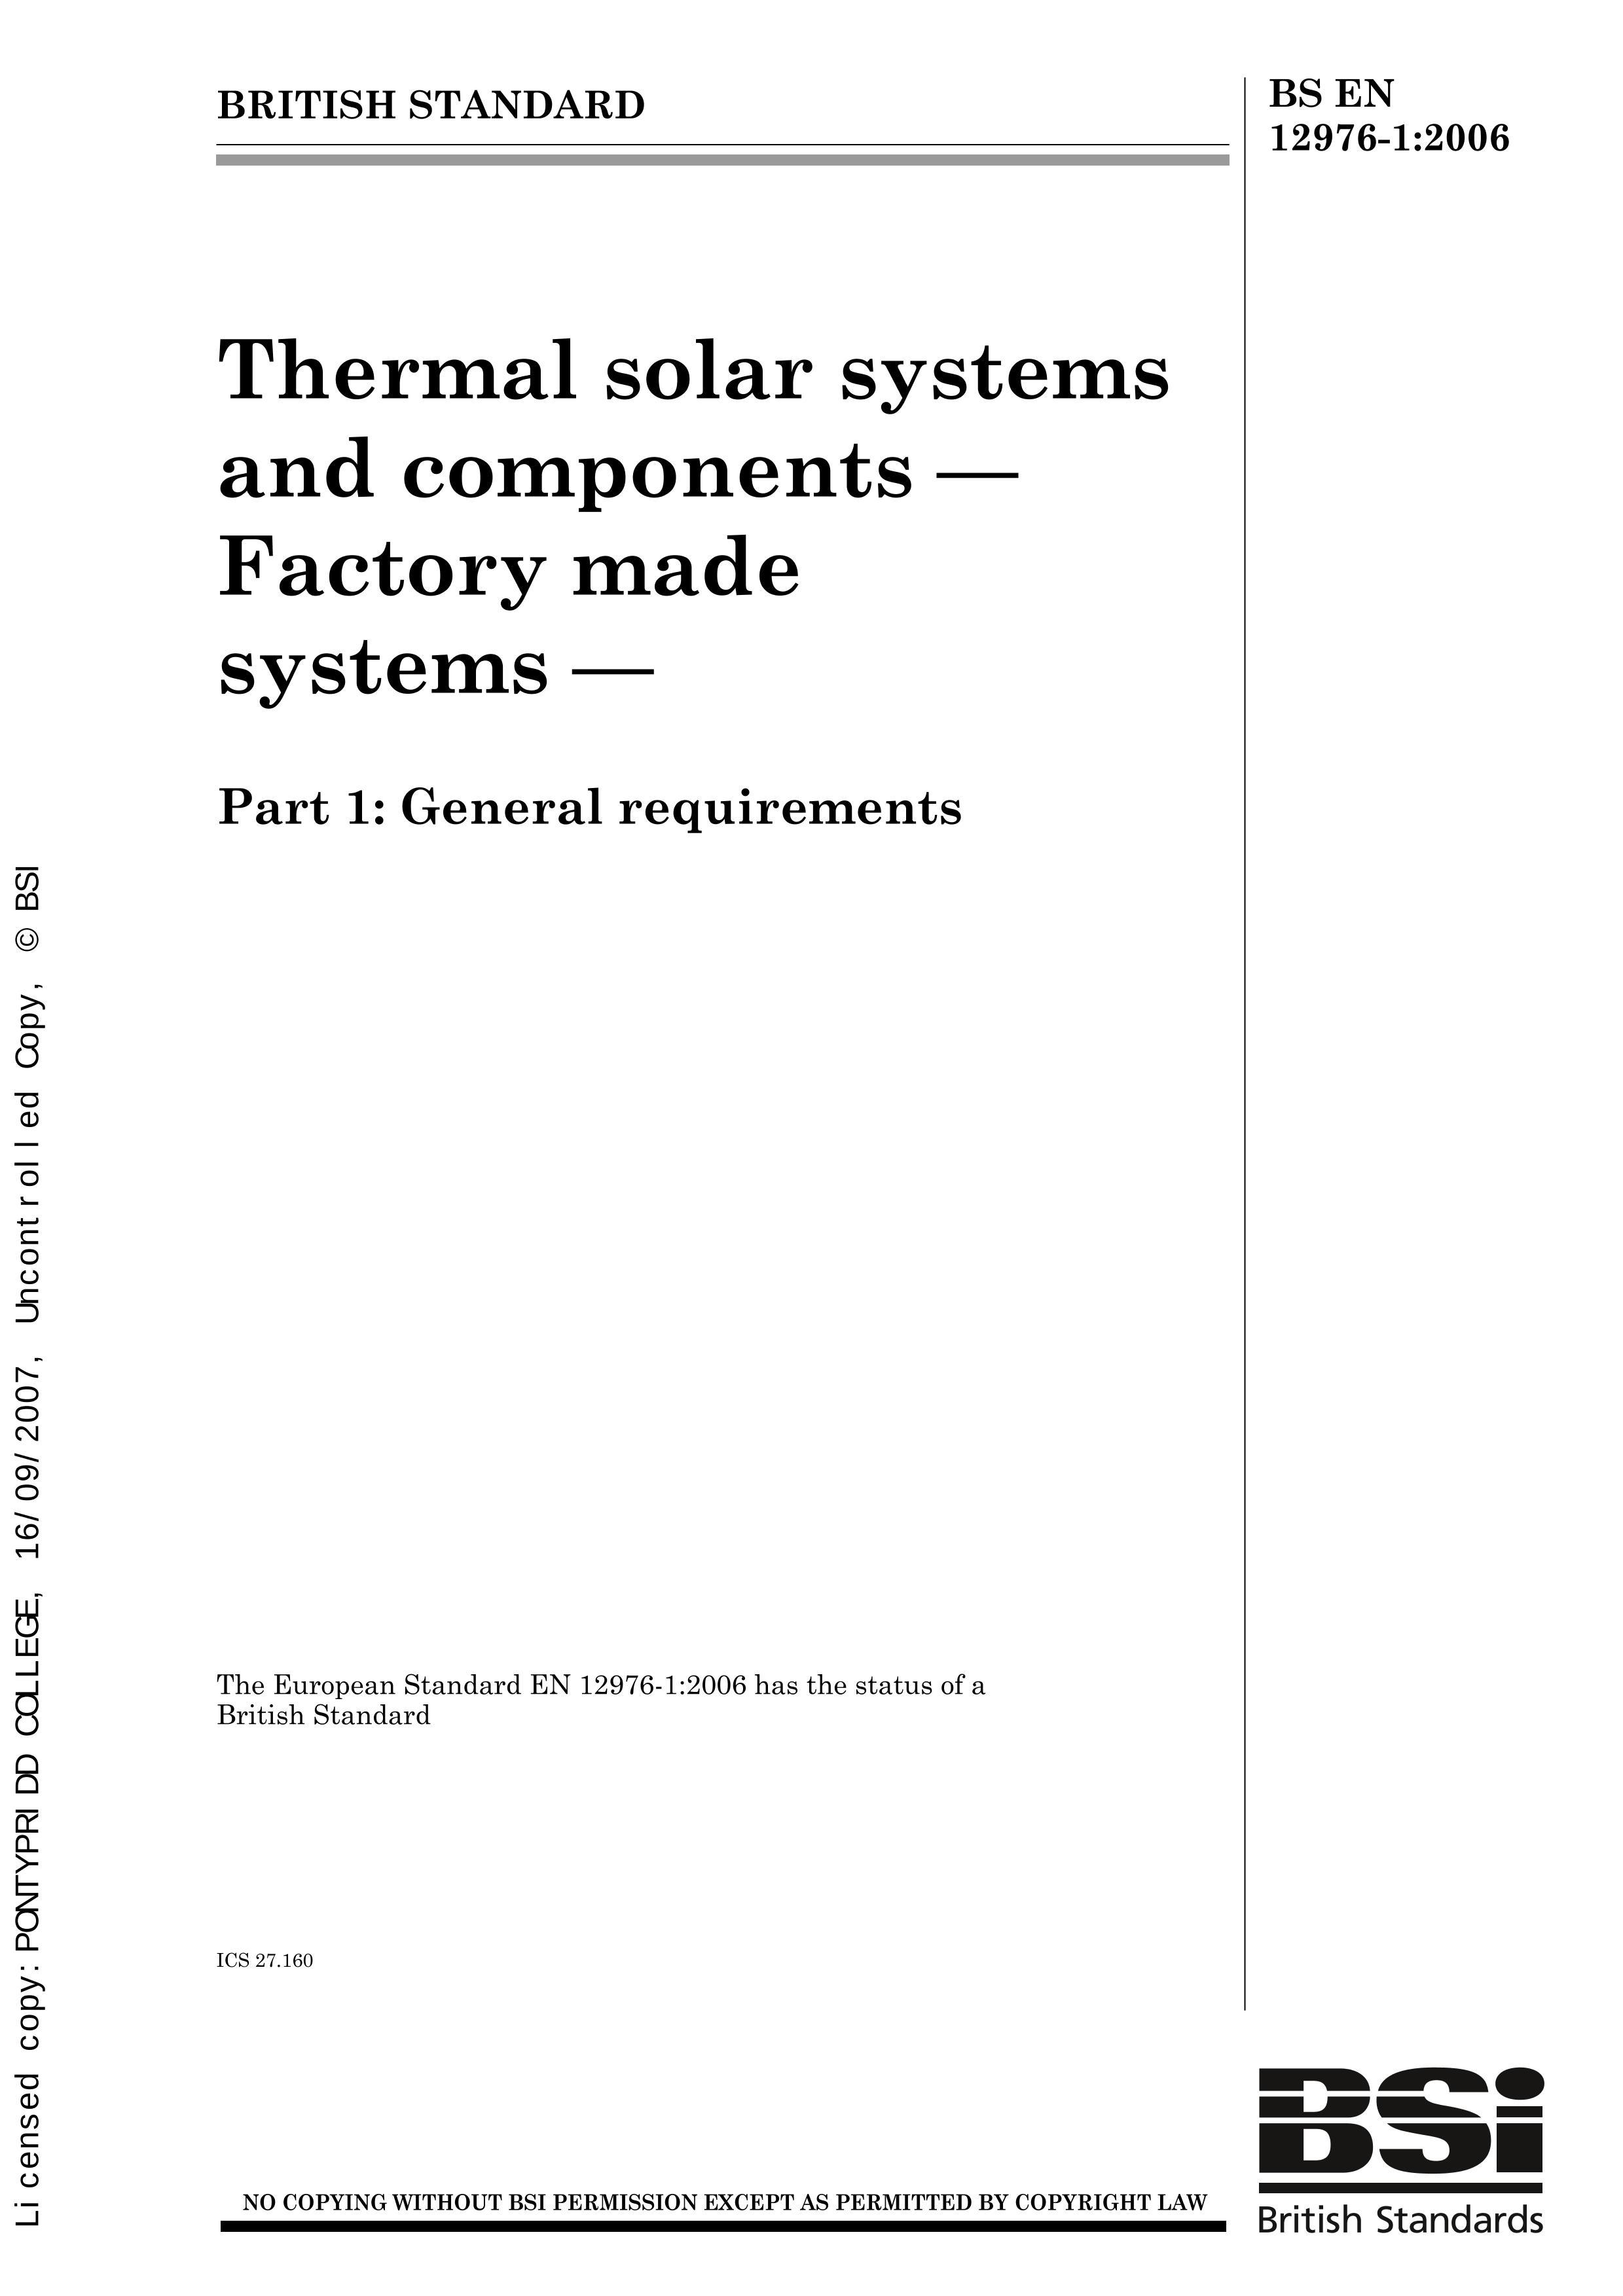 BS EN 12976-1-2006 Thermal solar systems and components - Factory made systems- General requirements.pdf1ҳ